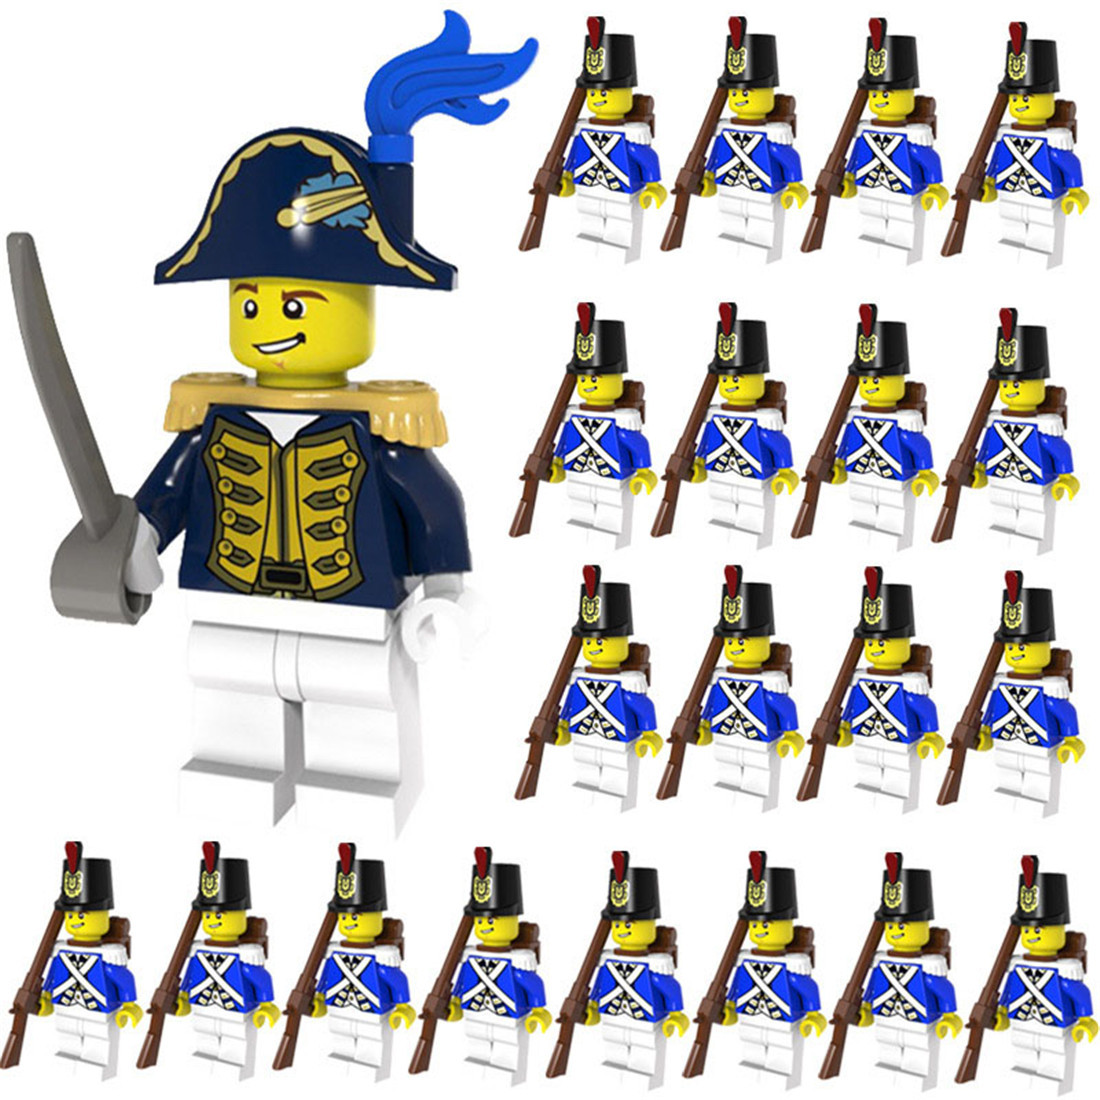 American Revolutionary War US Navy Marine Corps Soldier 21pcs Minifigures Toys